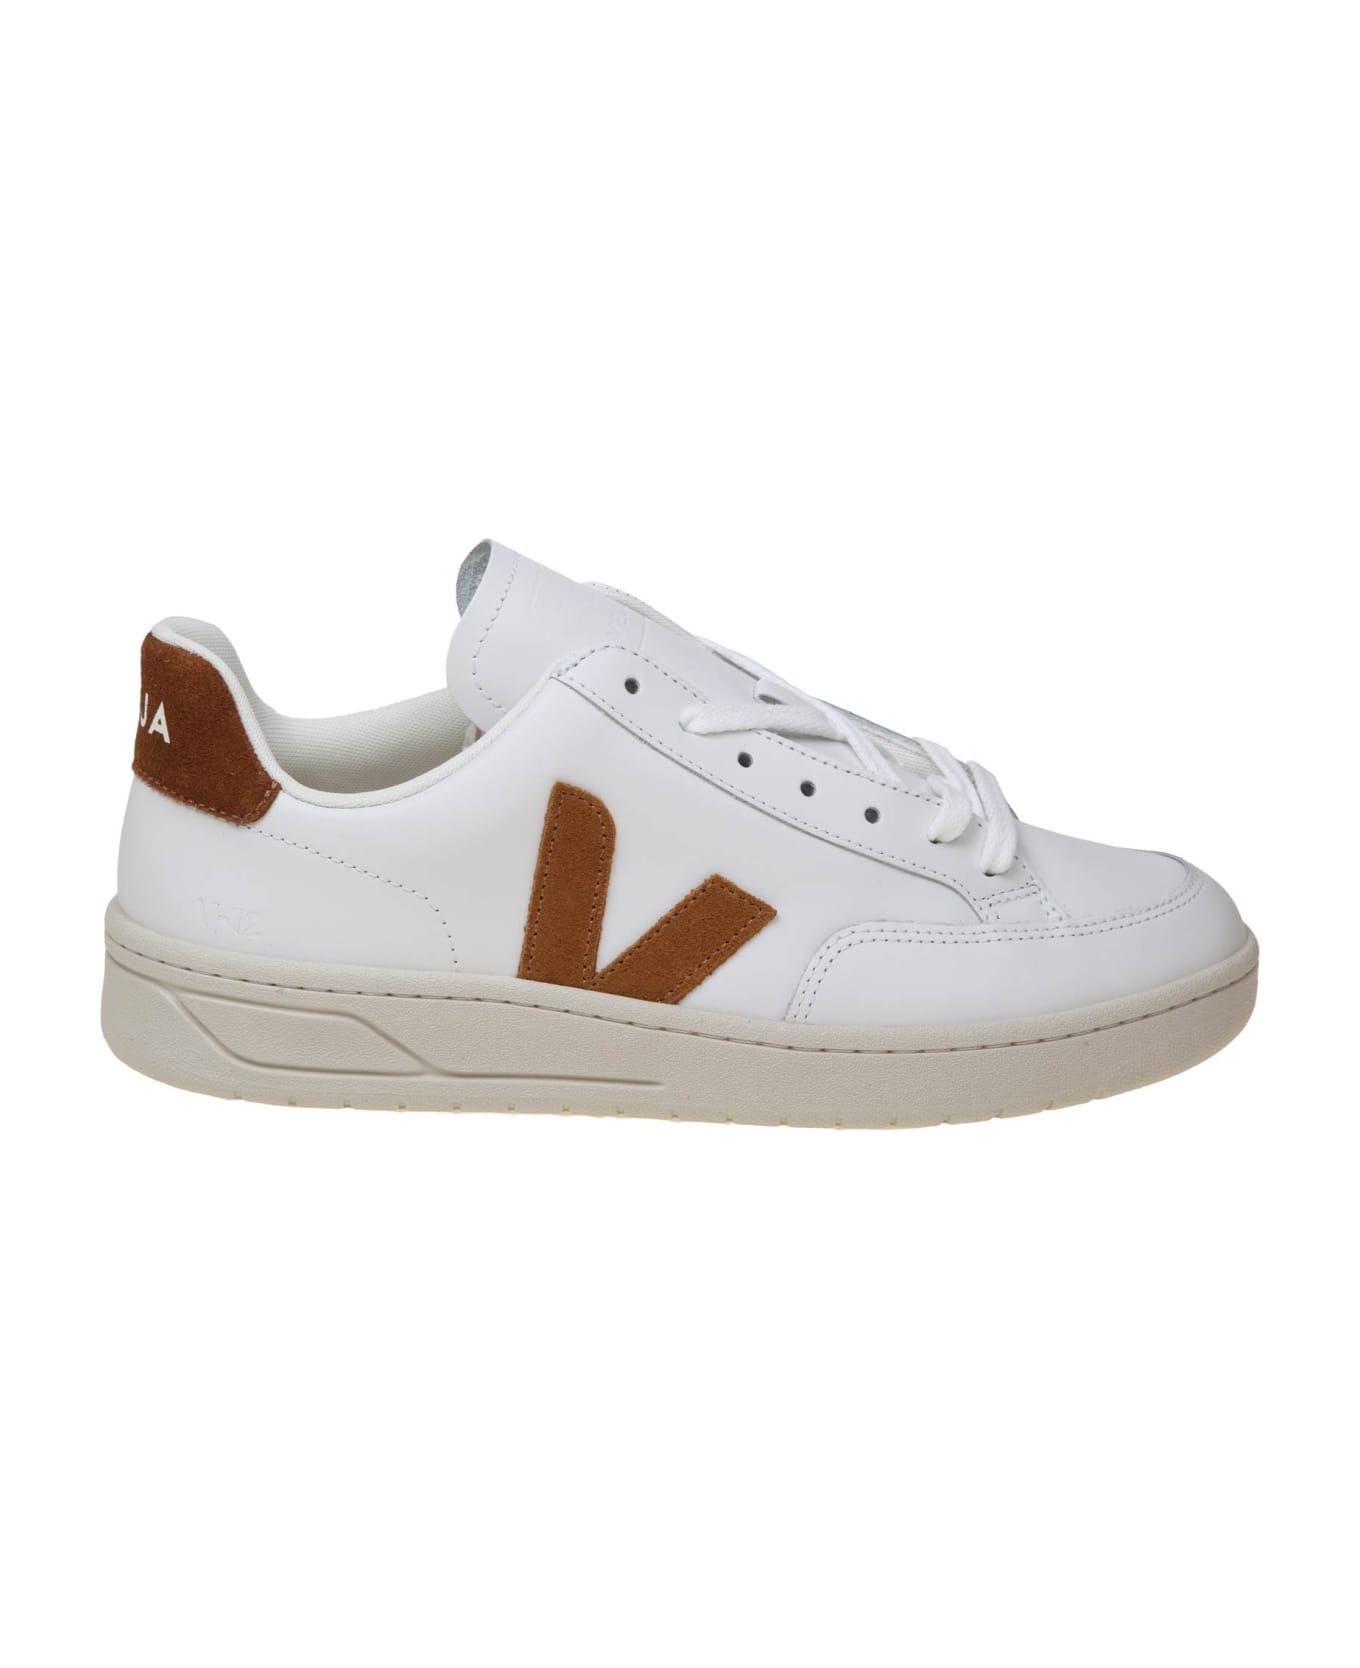 Veja V 90 Sneakers In White And Camel Leather - WHITE/CAMEL